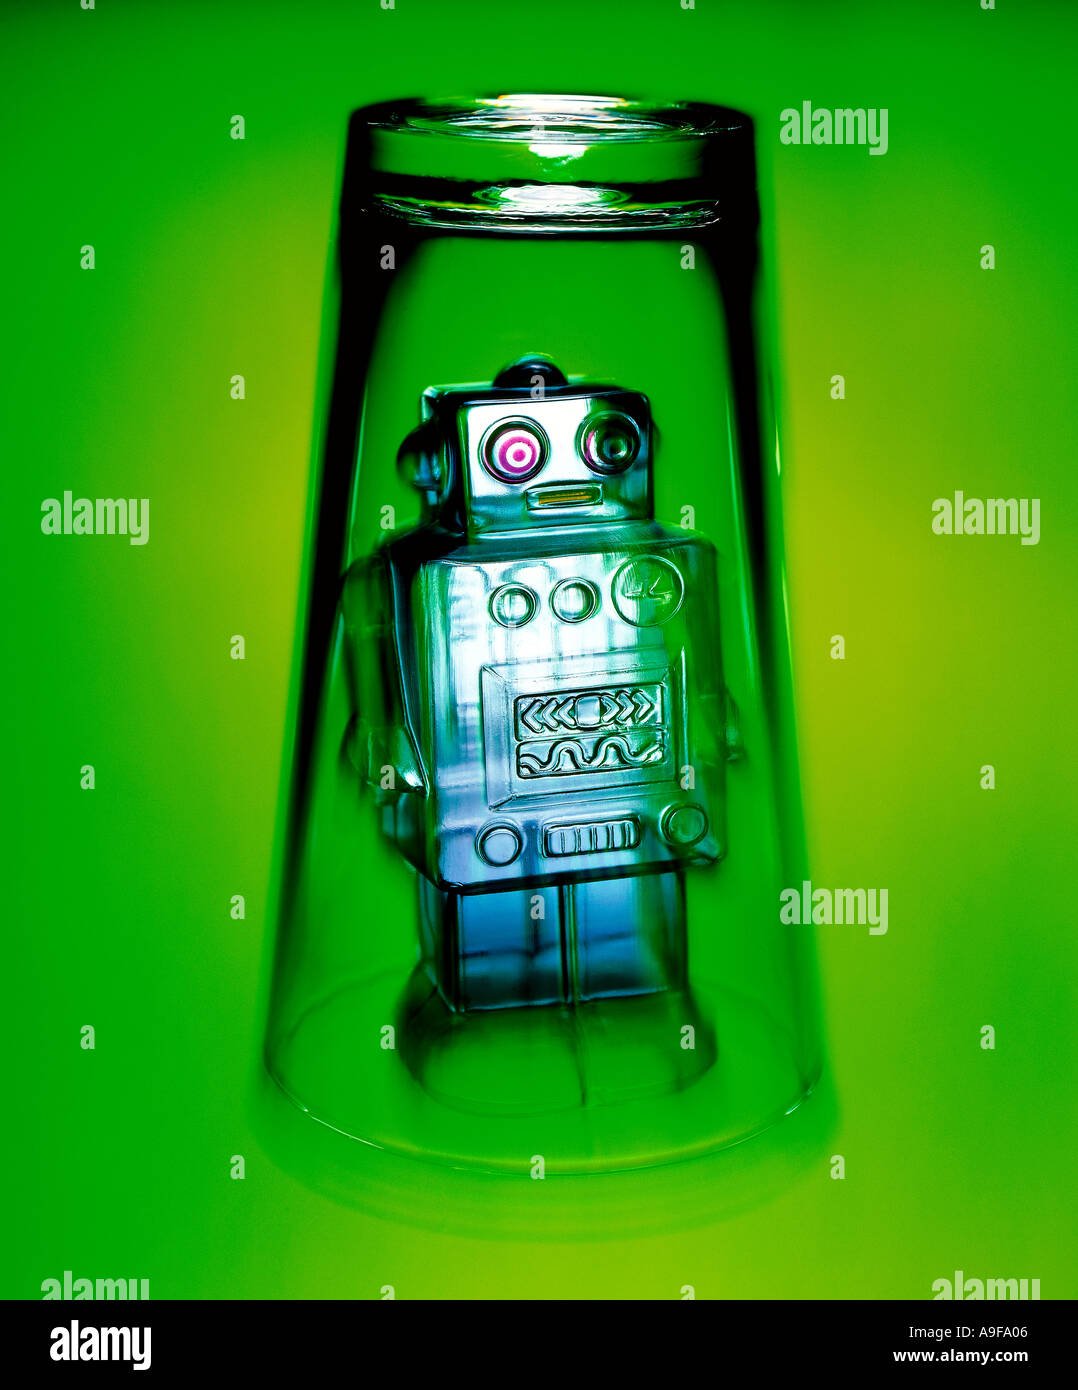 toy robot trapped in glass on green surface Stock Photo